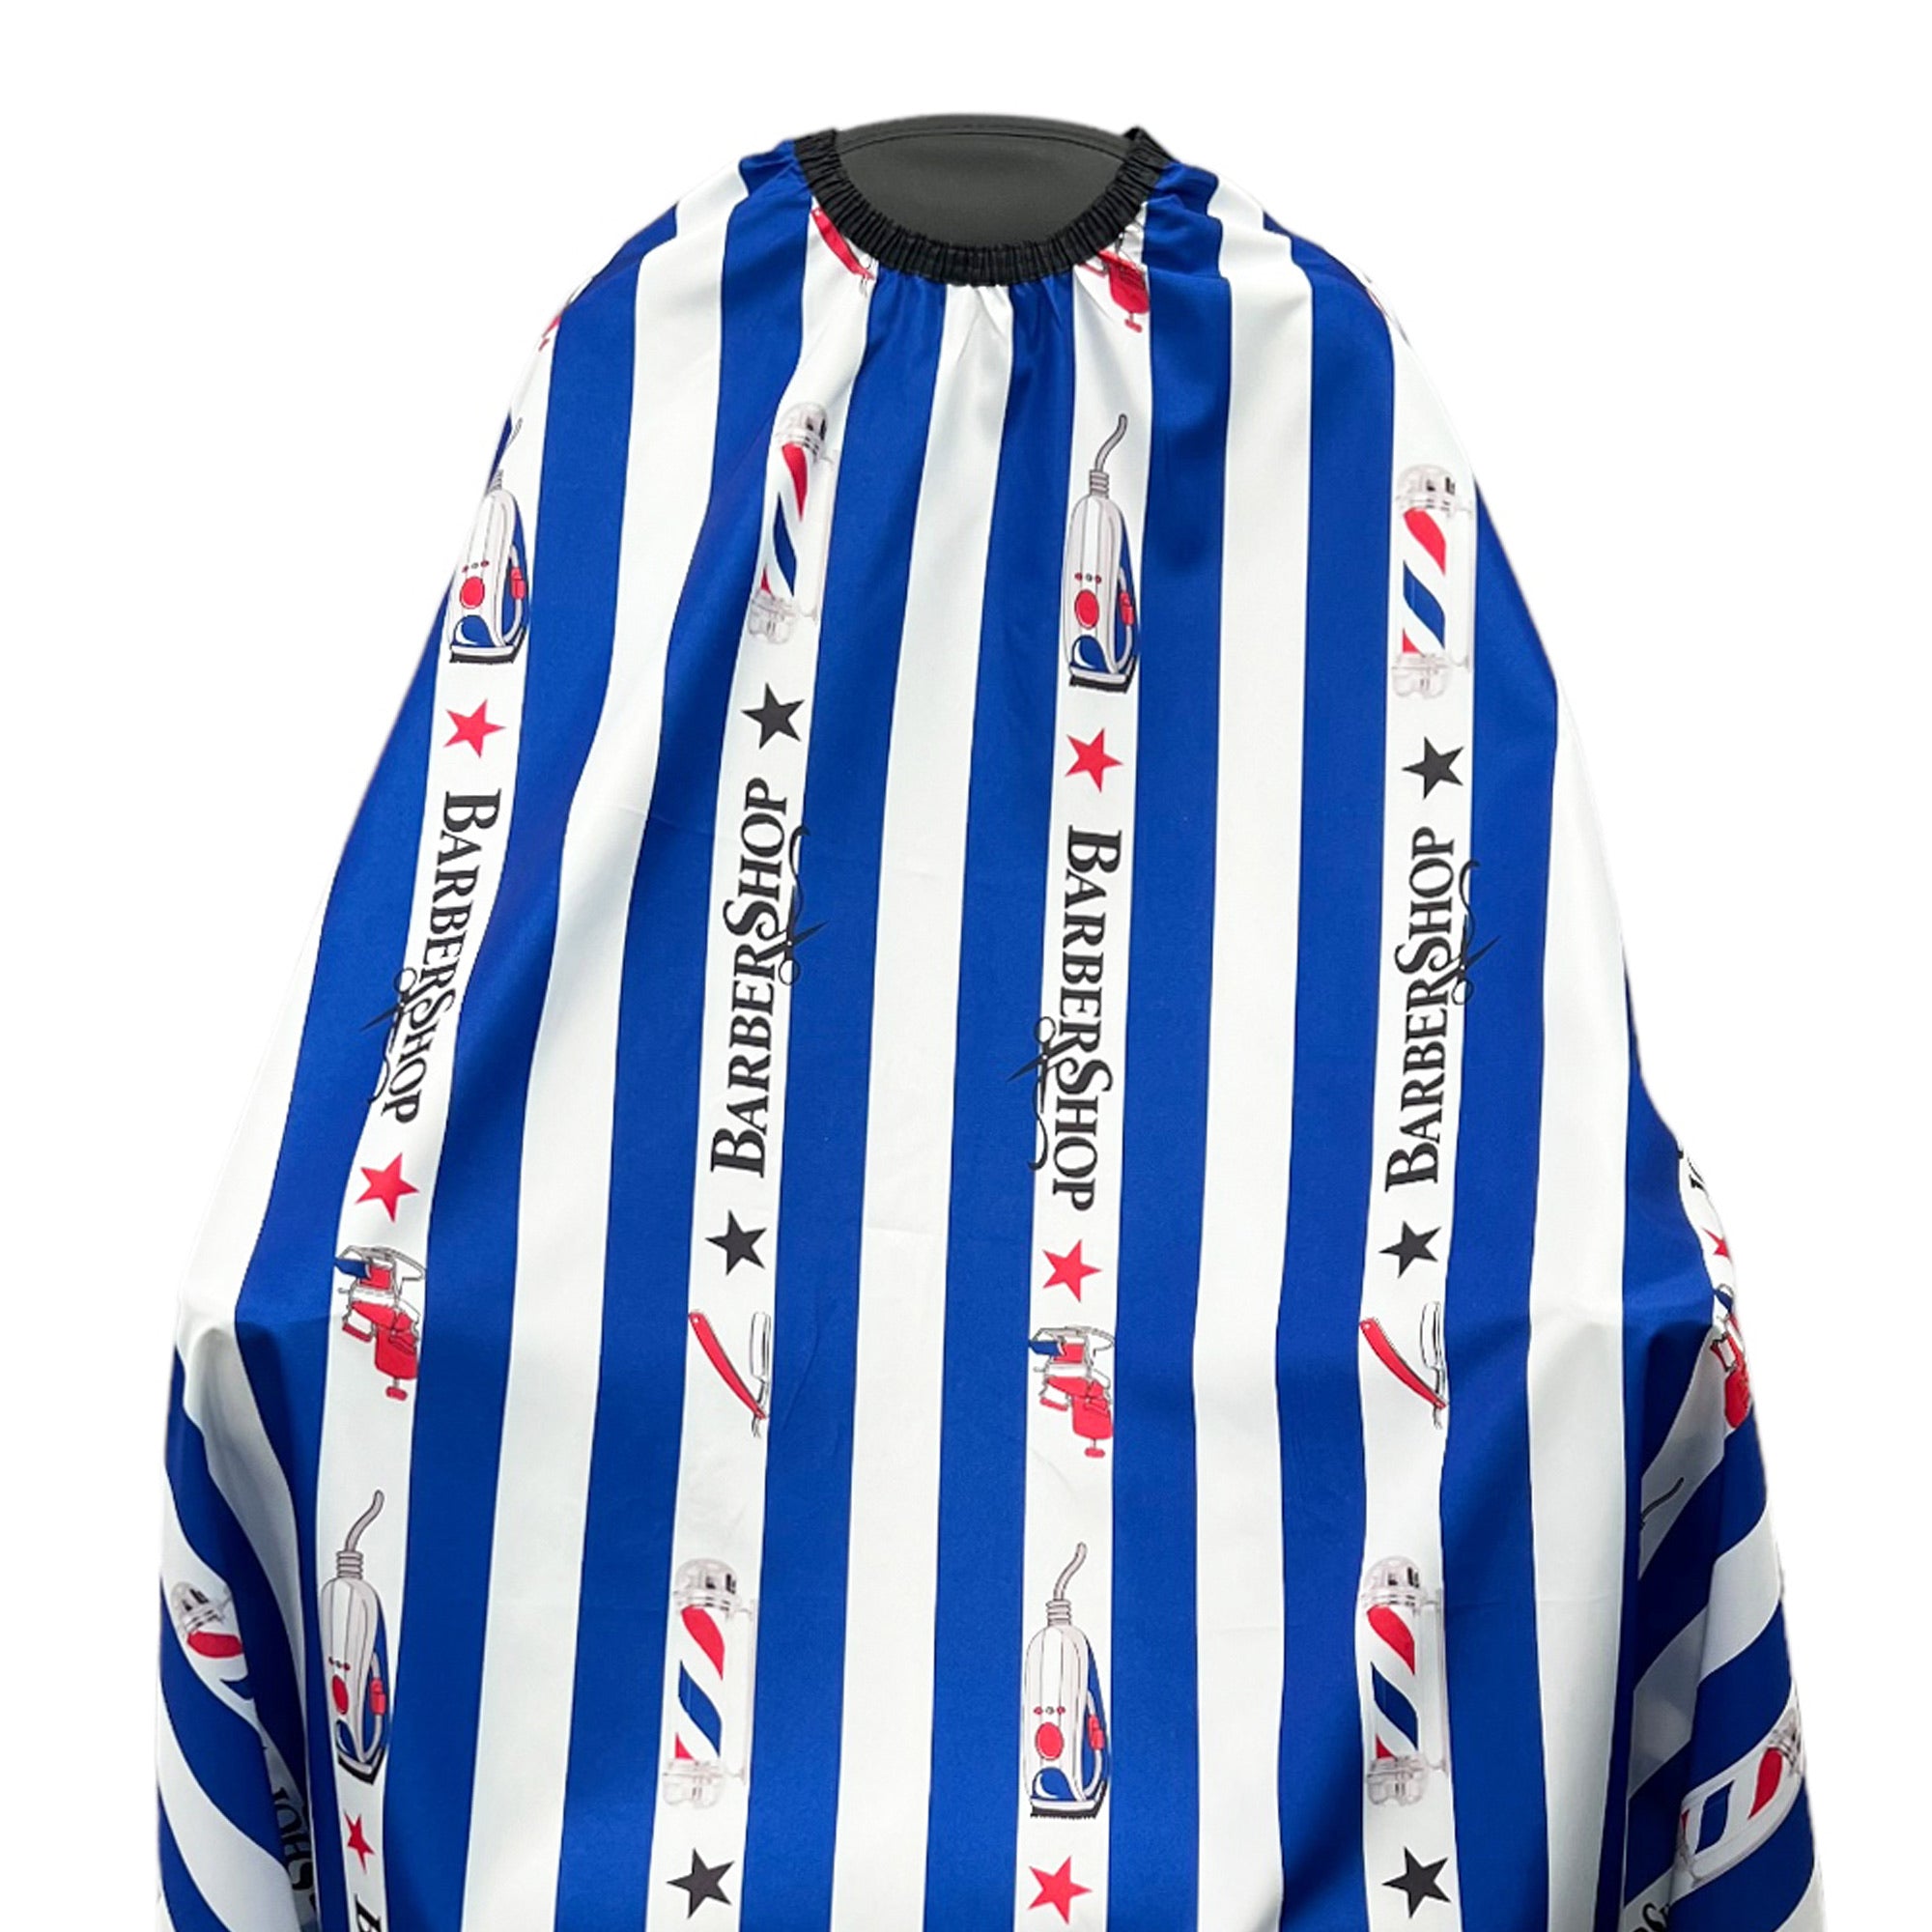 Gabri - Barber Hairdressing Hair Cutting Capes & Gowns Blue & White Stripes